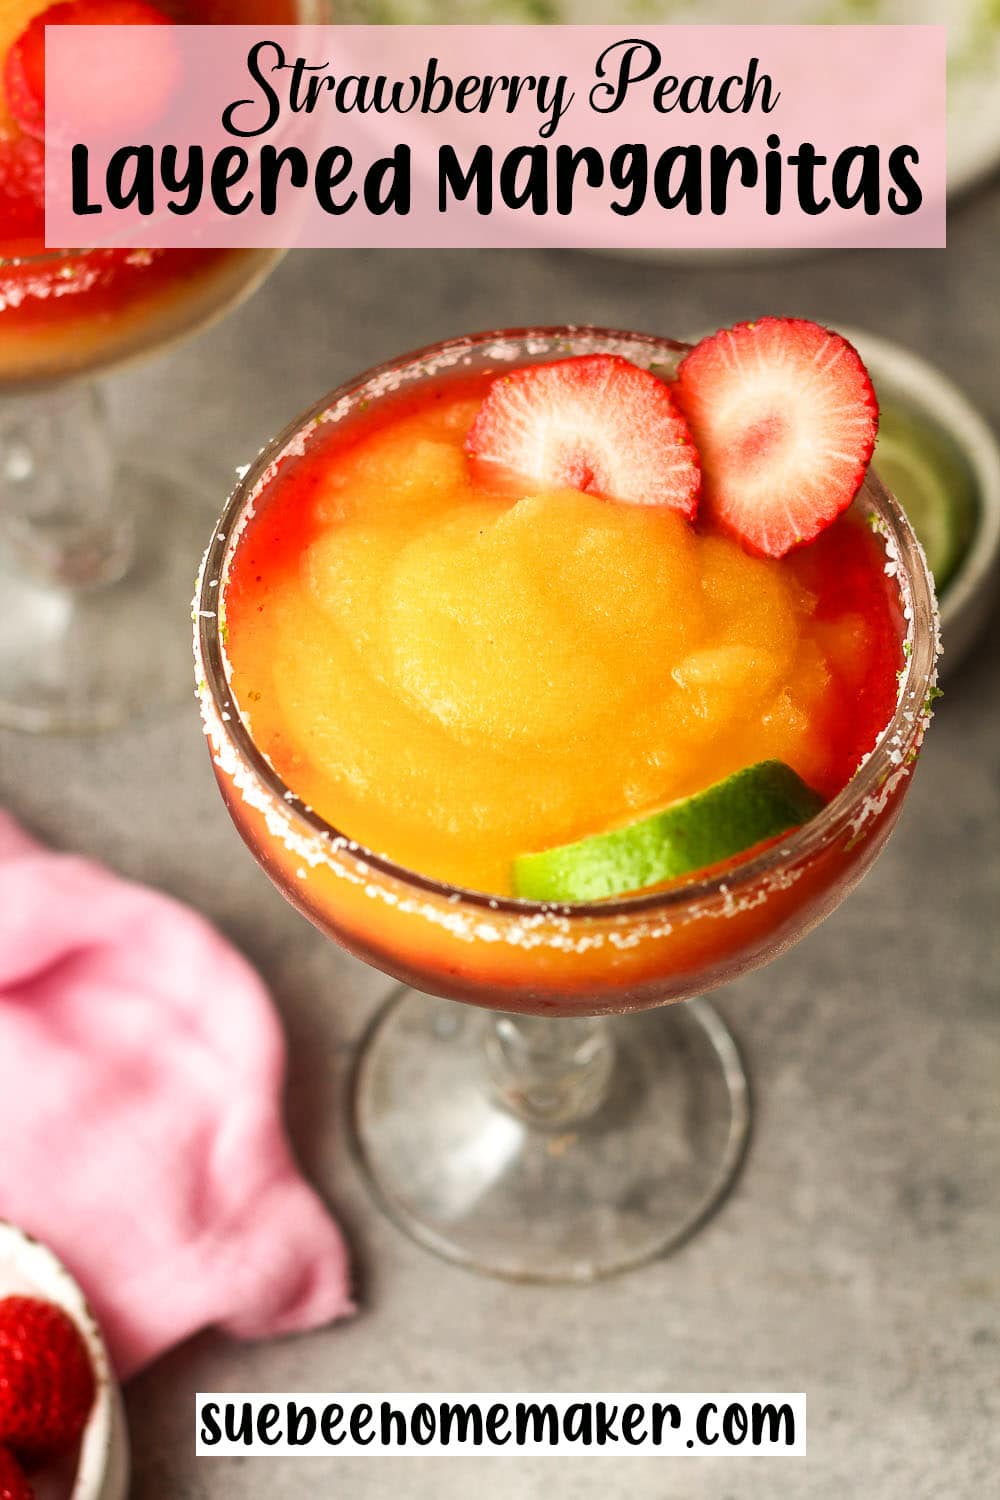 Overhead view of a large strawberry peach layered margarita.